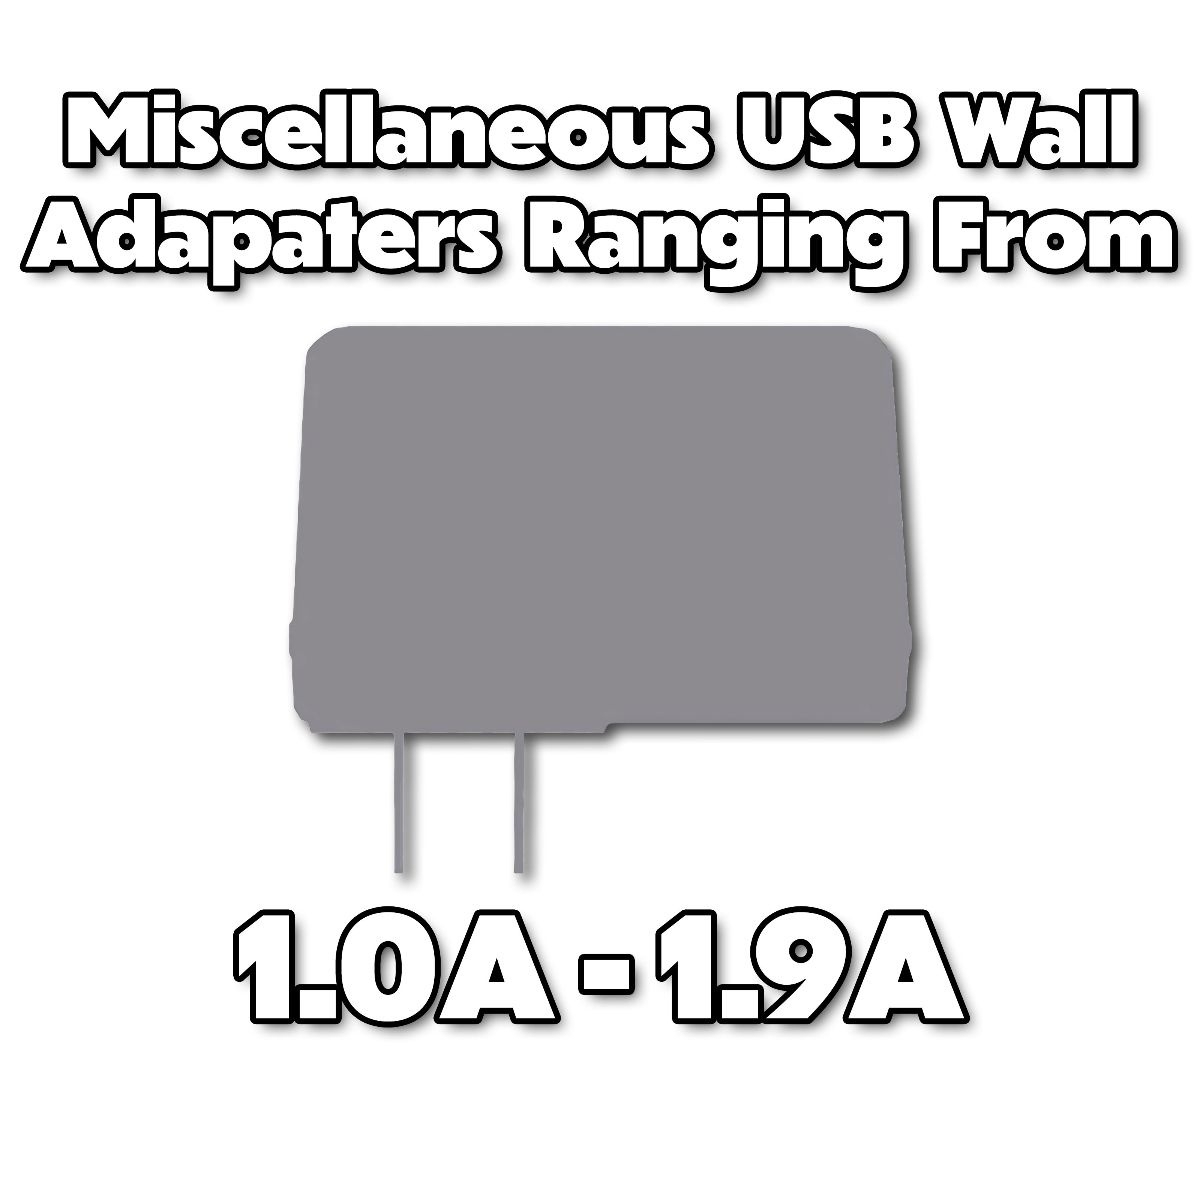 Miscellaneous & Mixed Wall Charger USB Adapter (1.0A To 1.9A Output) - 1 Adapter